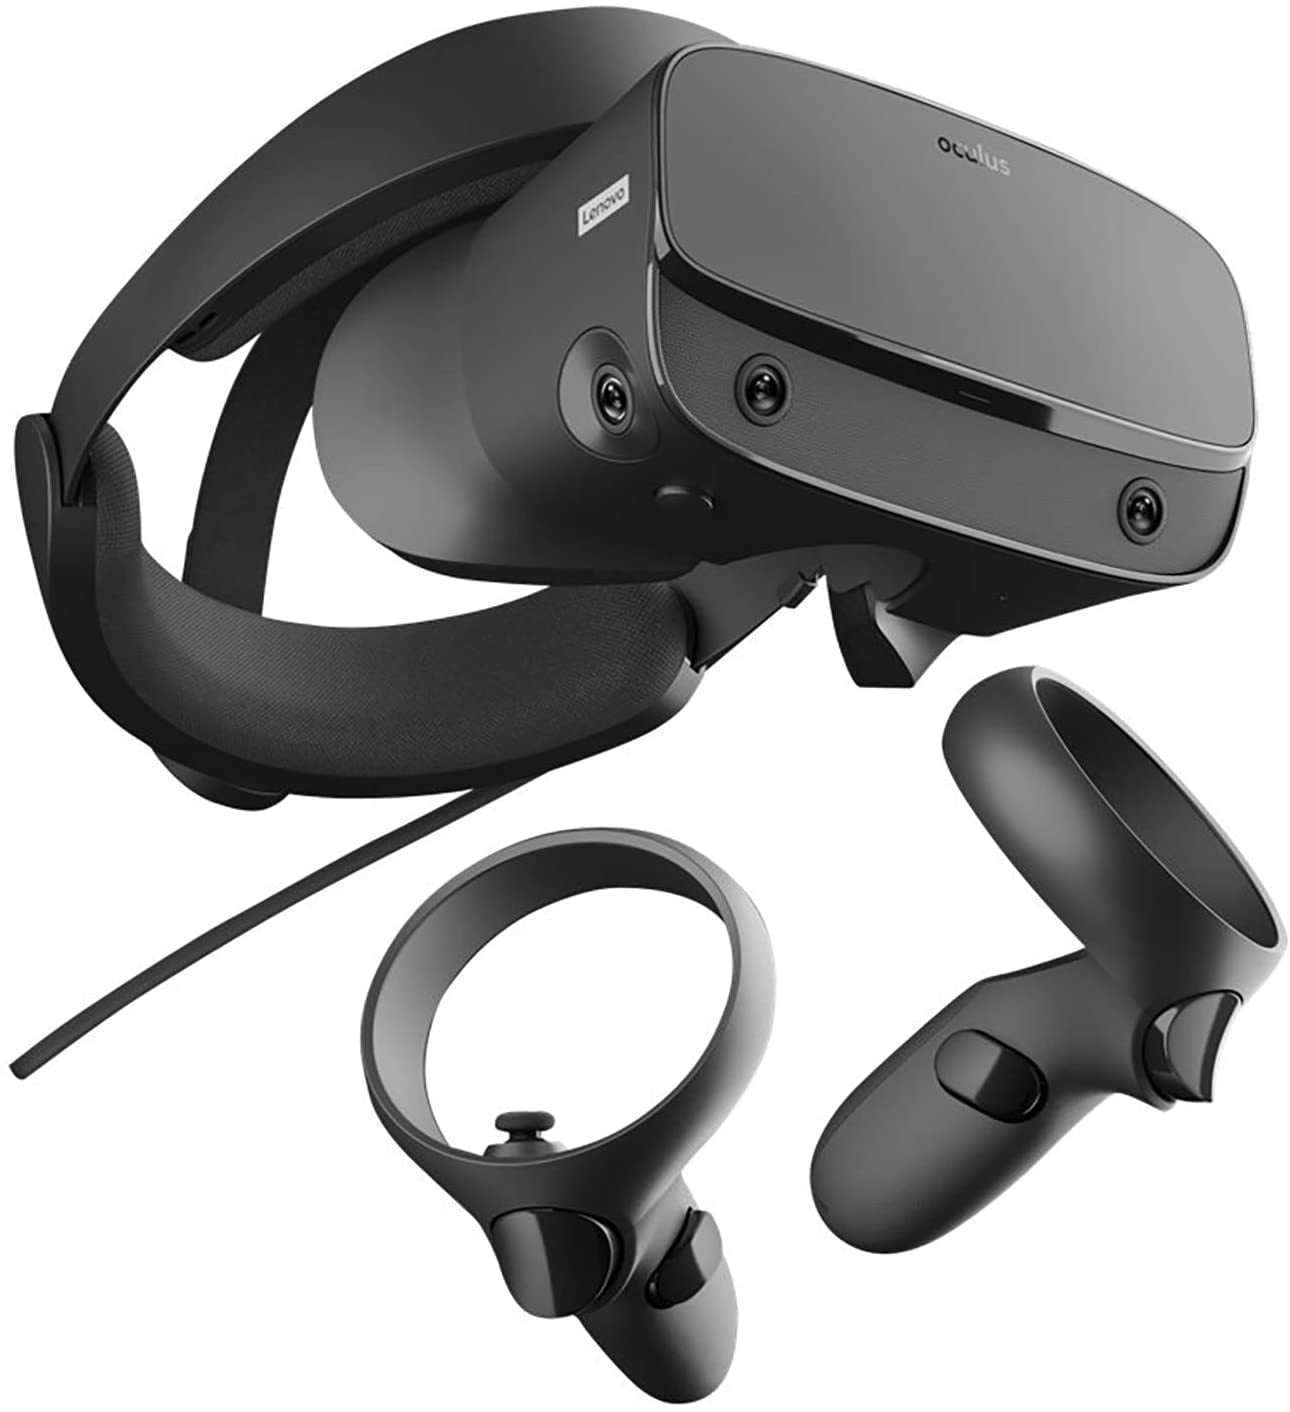 Oculus - Rift S PC-Powered VR Gaming Headset - Black, Two Touch  Controllers, Fit Wheel Adjustable Halo Headband, Motion Insight Tracking  Sensor, Bundle with 10Ft Link Cable 